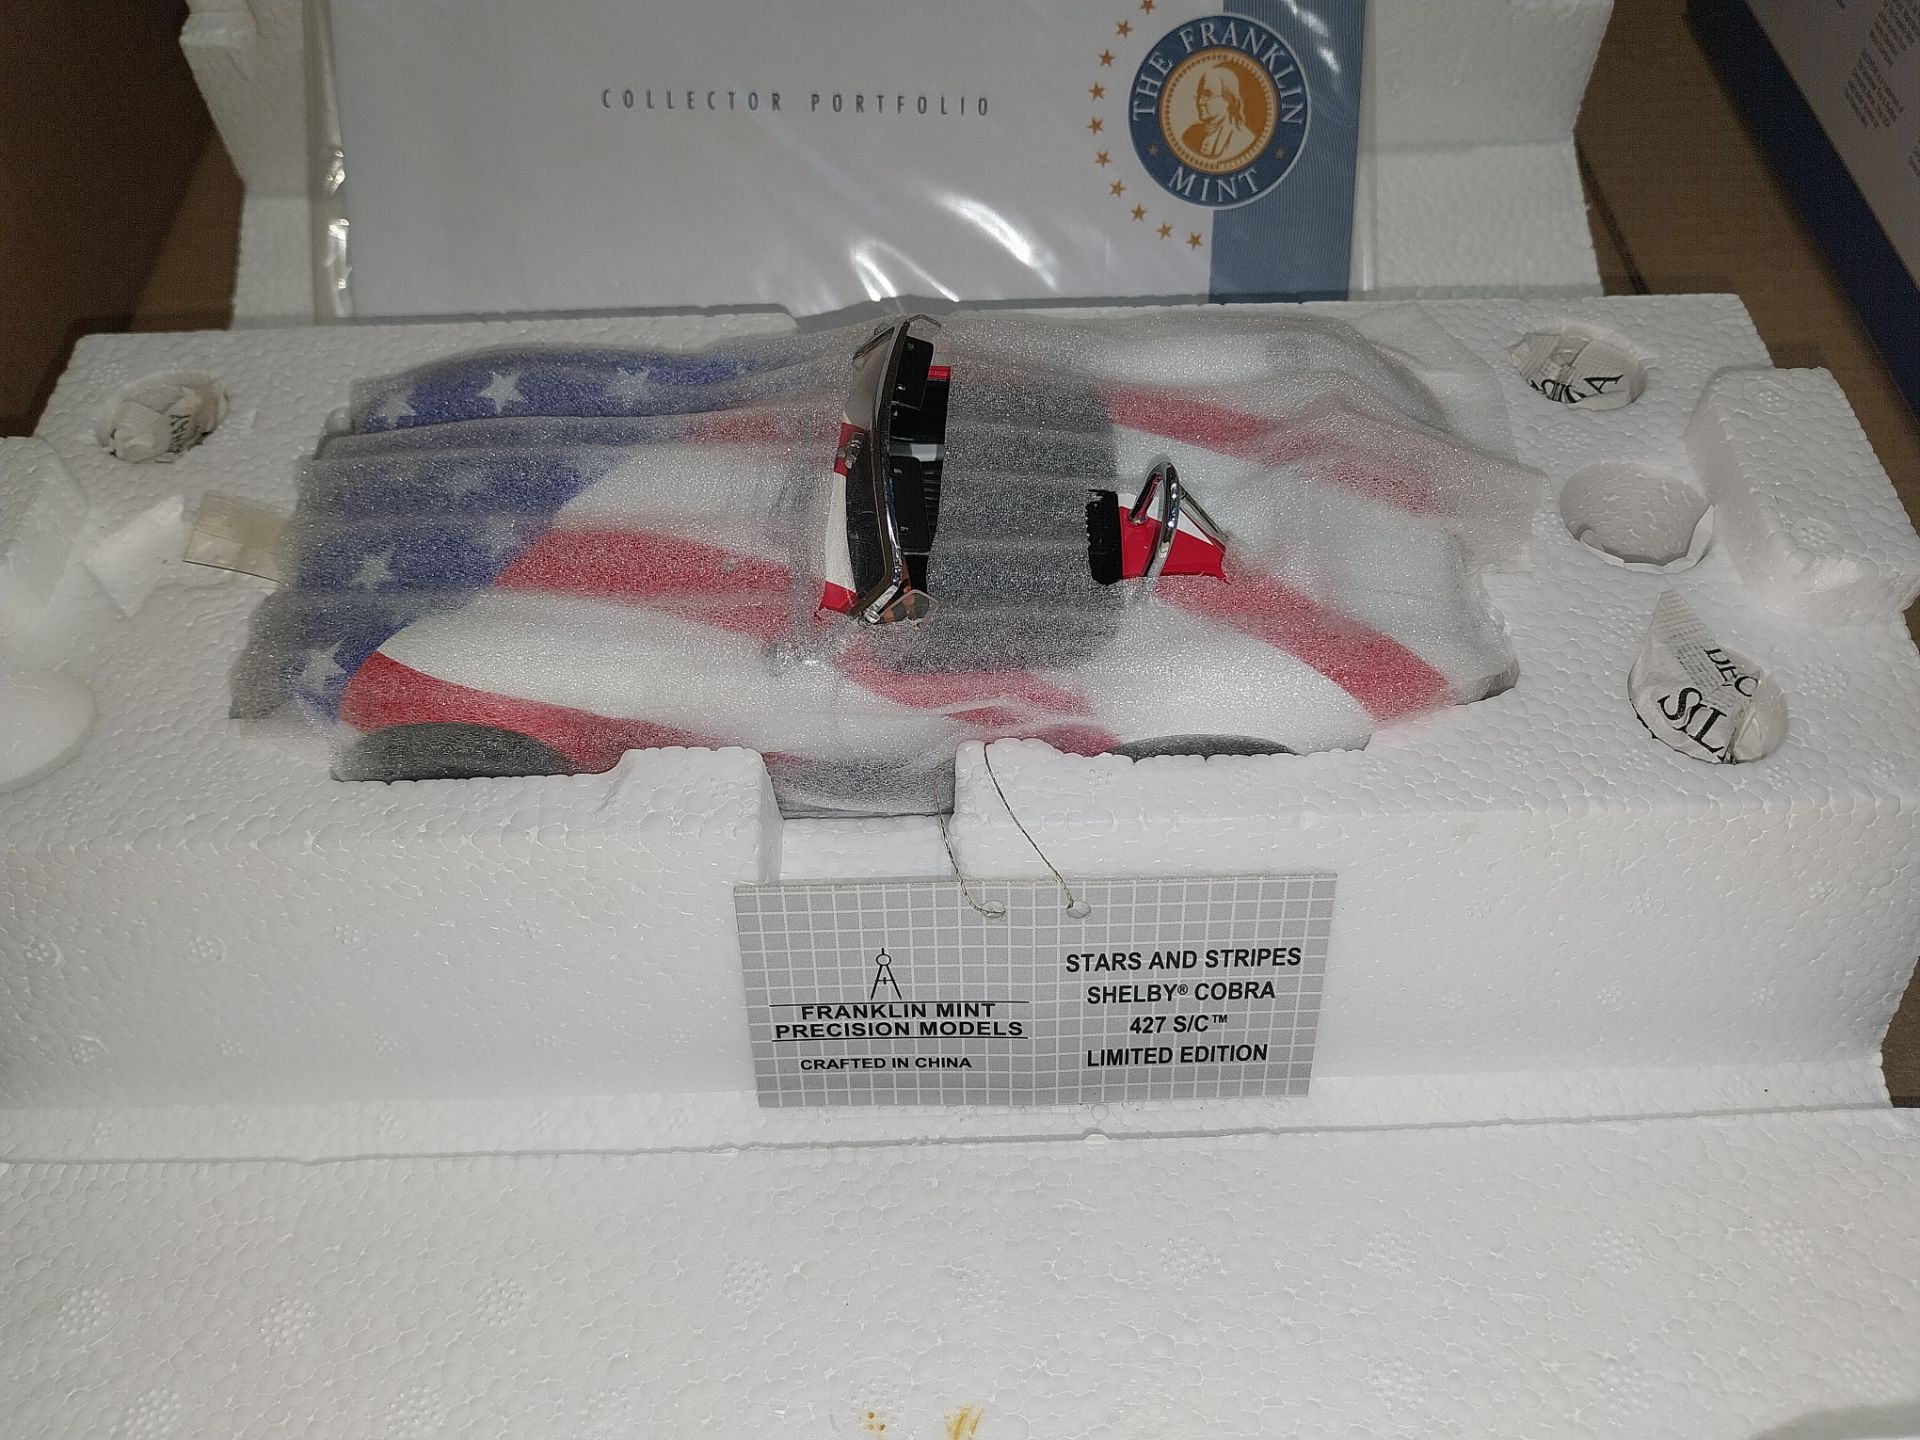 Franklin Mint, a boxed Shelby Cobra 427 S/C “Stars And Stripes” - Image 3 of 4